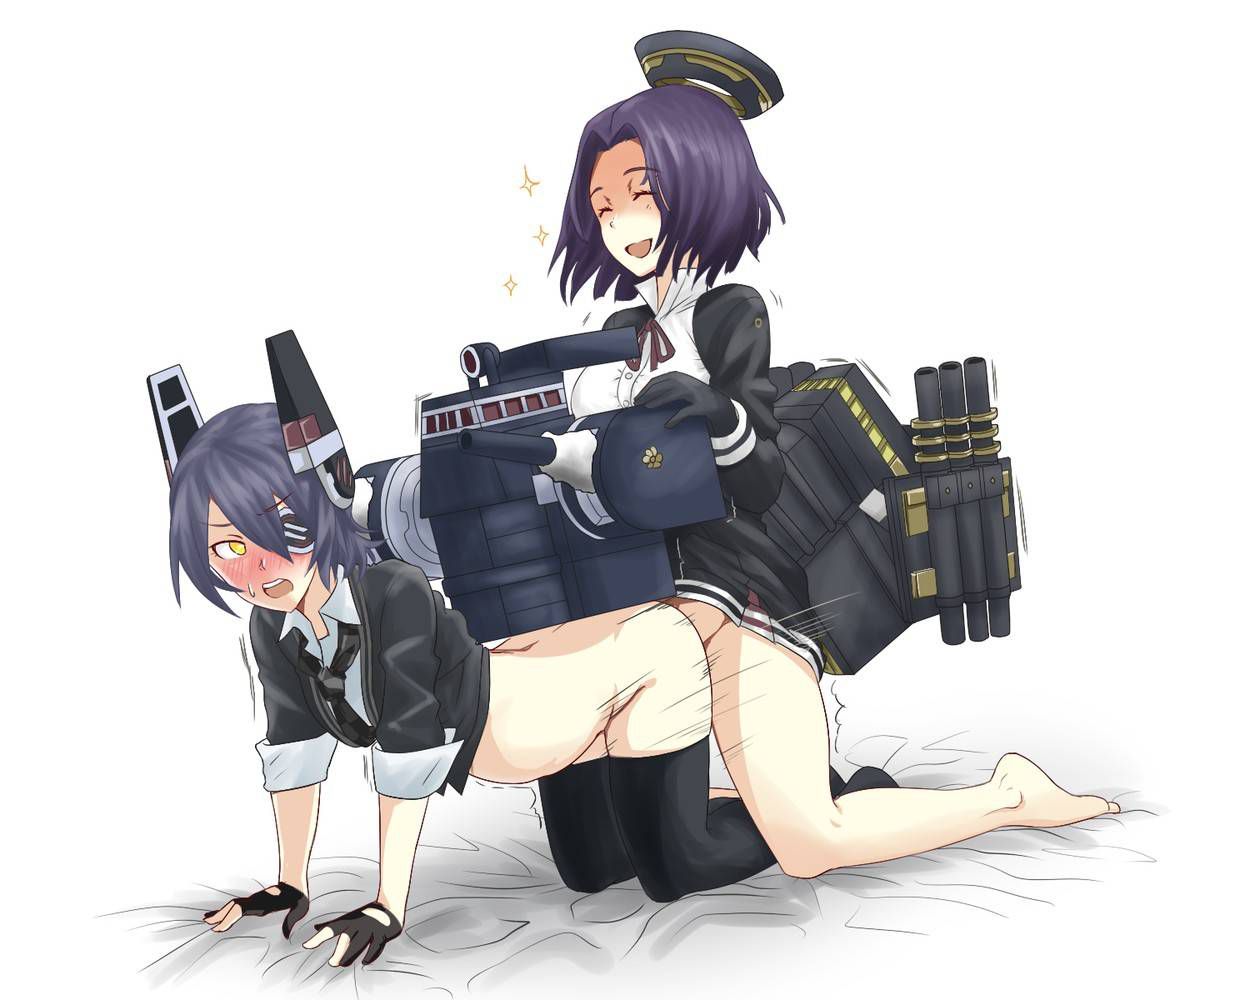 [Ship it: erotic photos wearing Tatsuta usually never so you do not see the 7